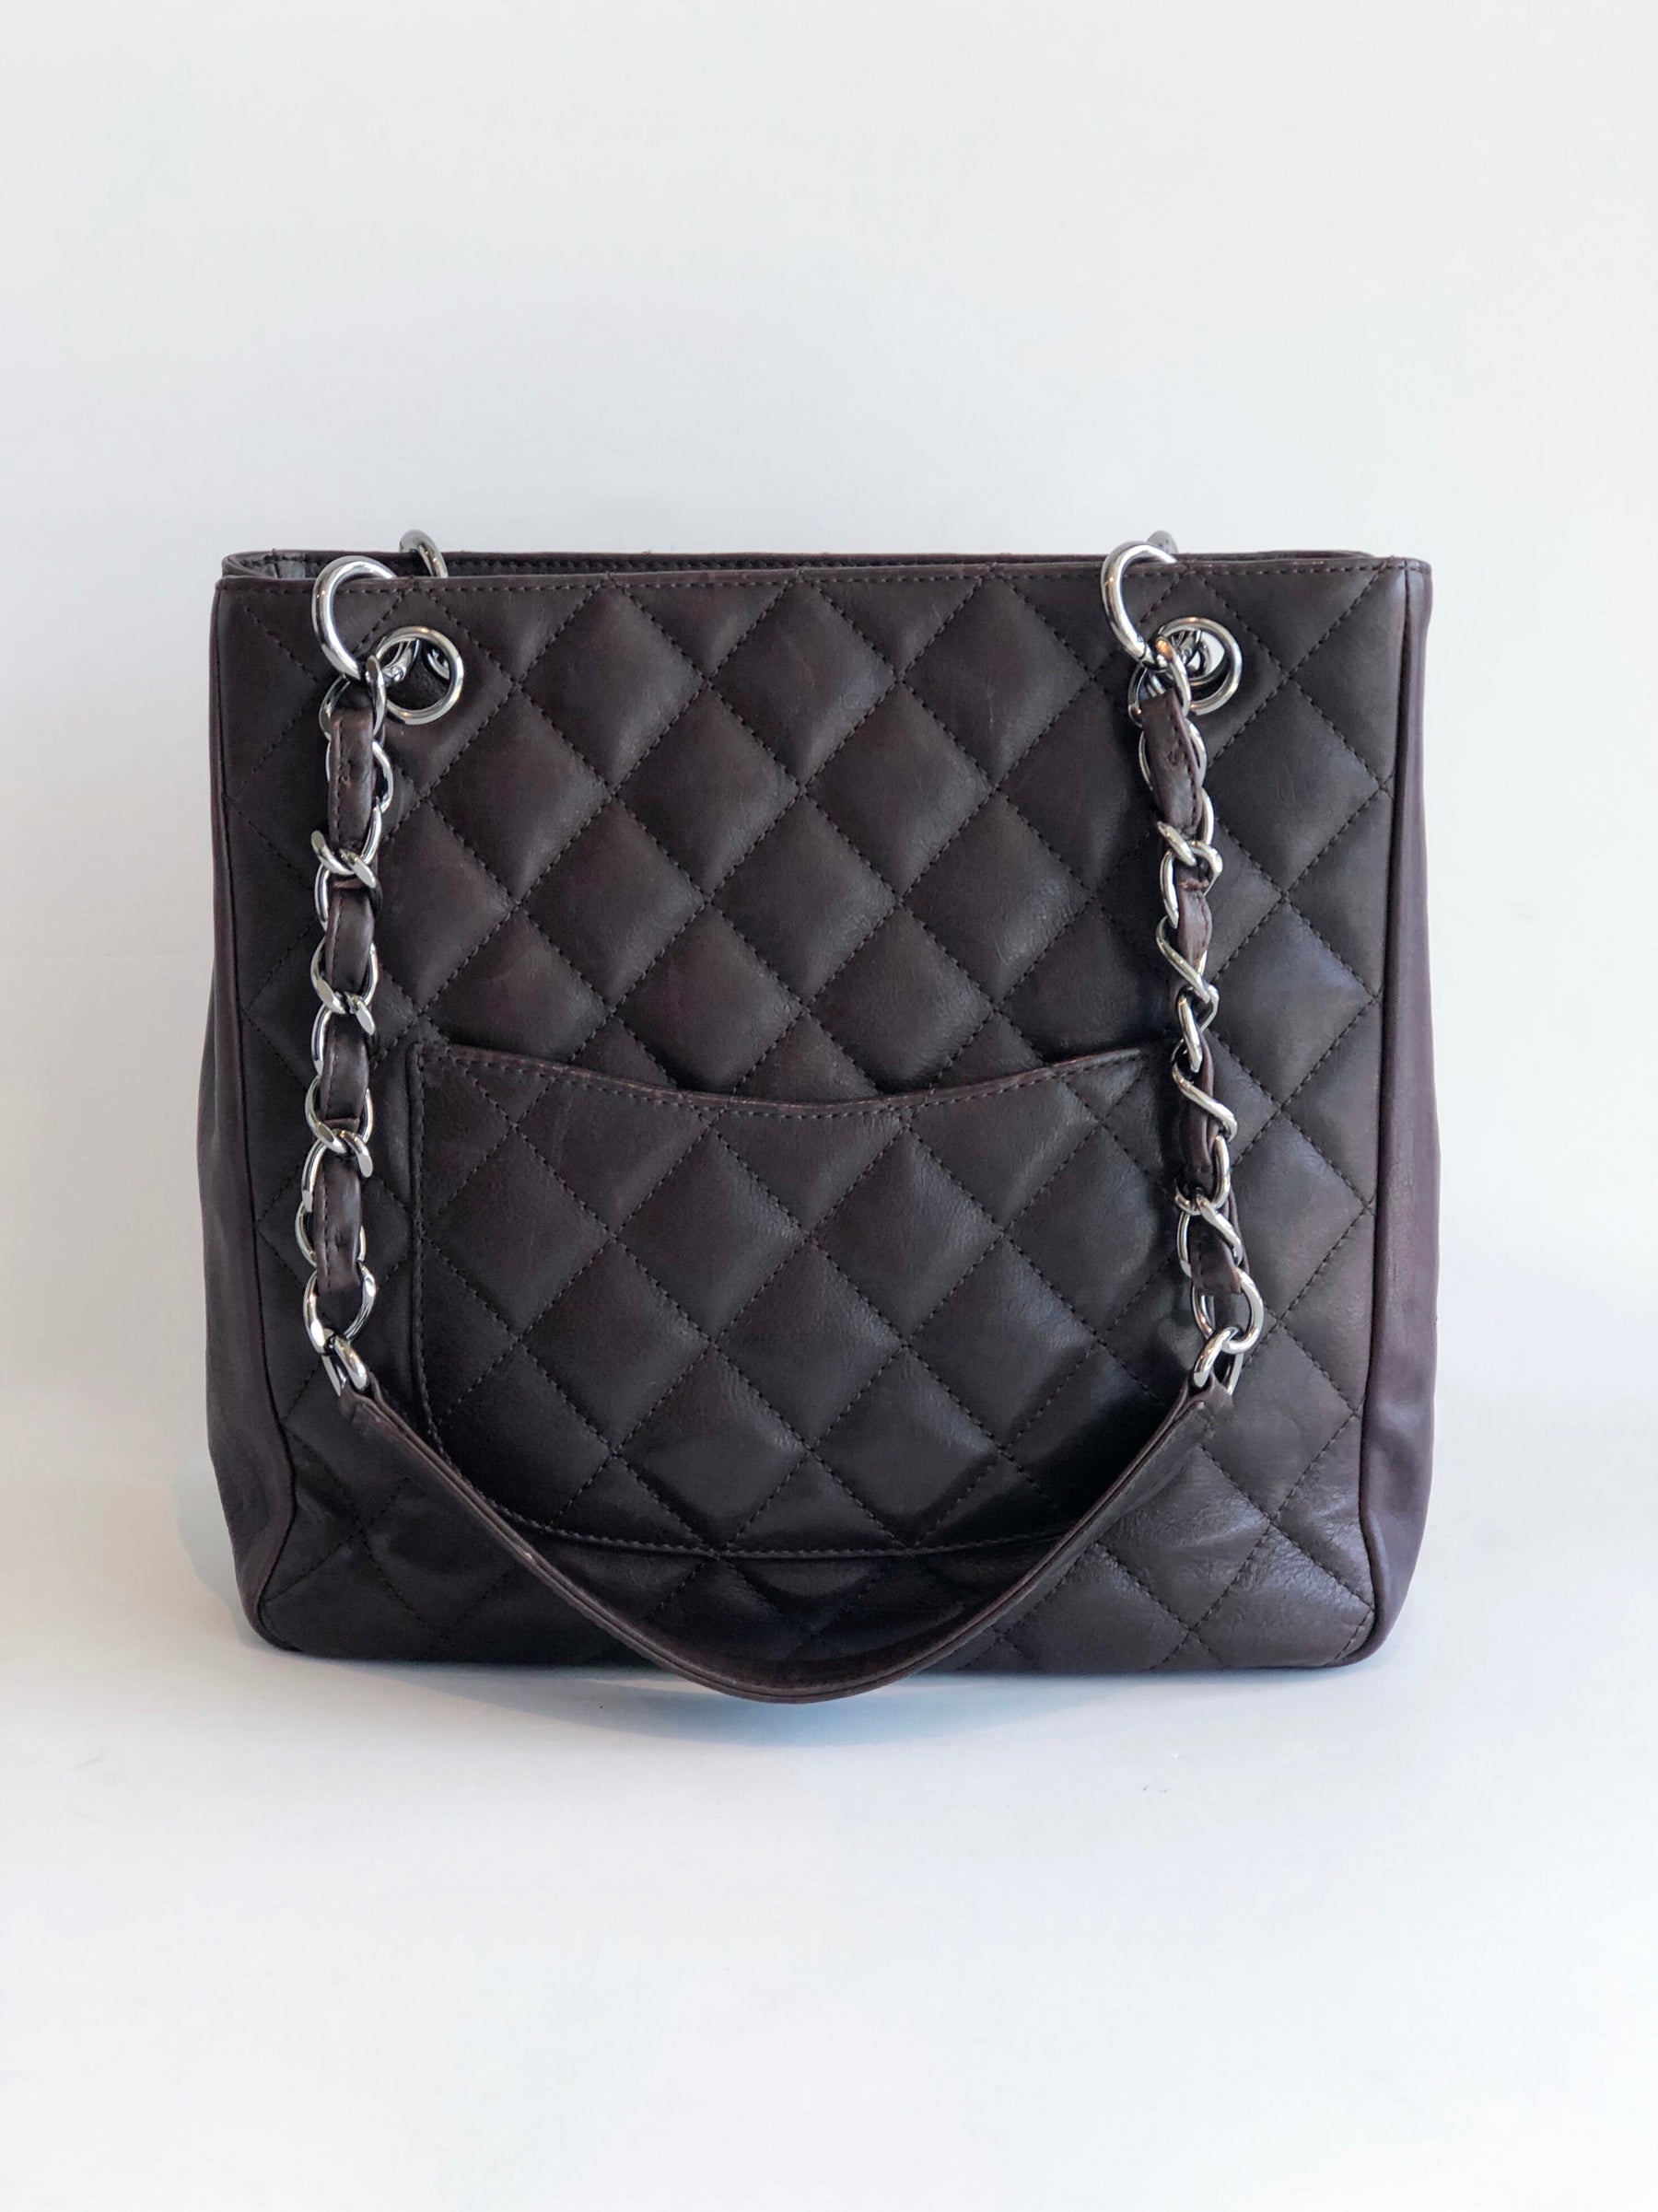 Chanel Petite Shopping Tote Brown